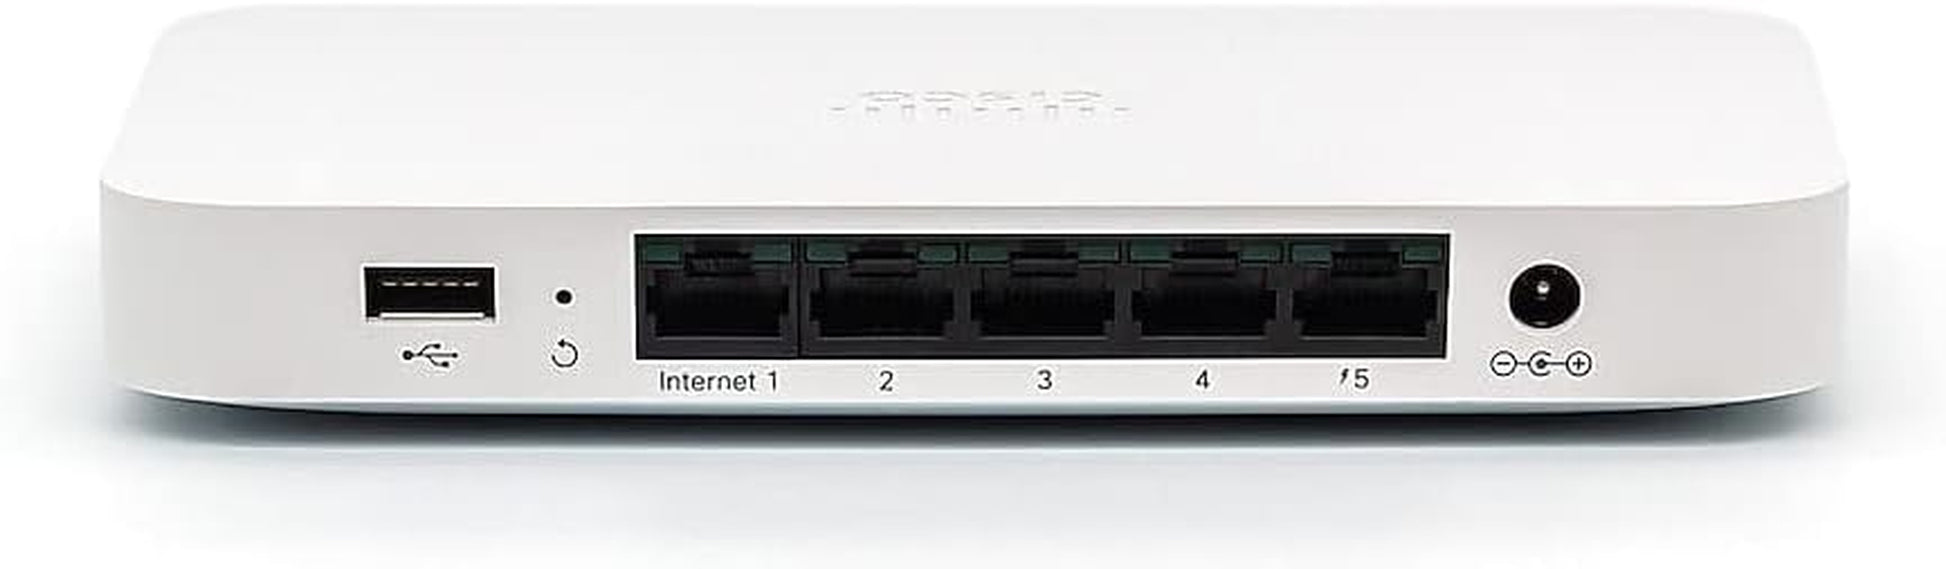 Ethernet Router Firewall | Cloud Managed | 5 Ports |  [GX20-HW-US]